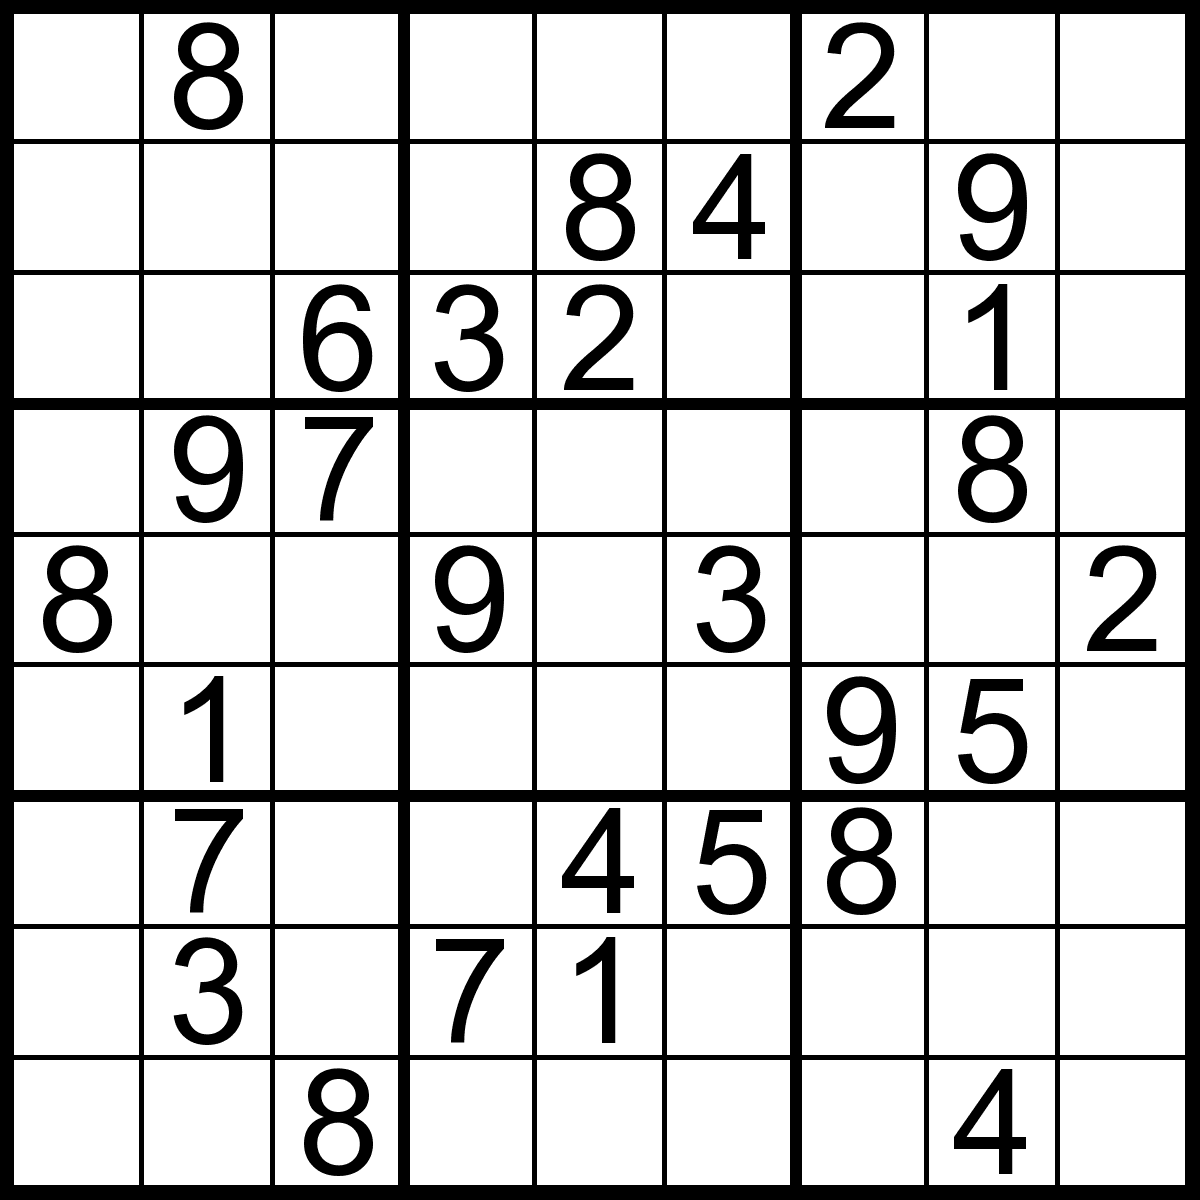 Sudoku Solver, Dylan Pavao